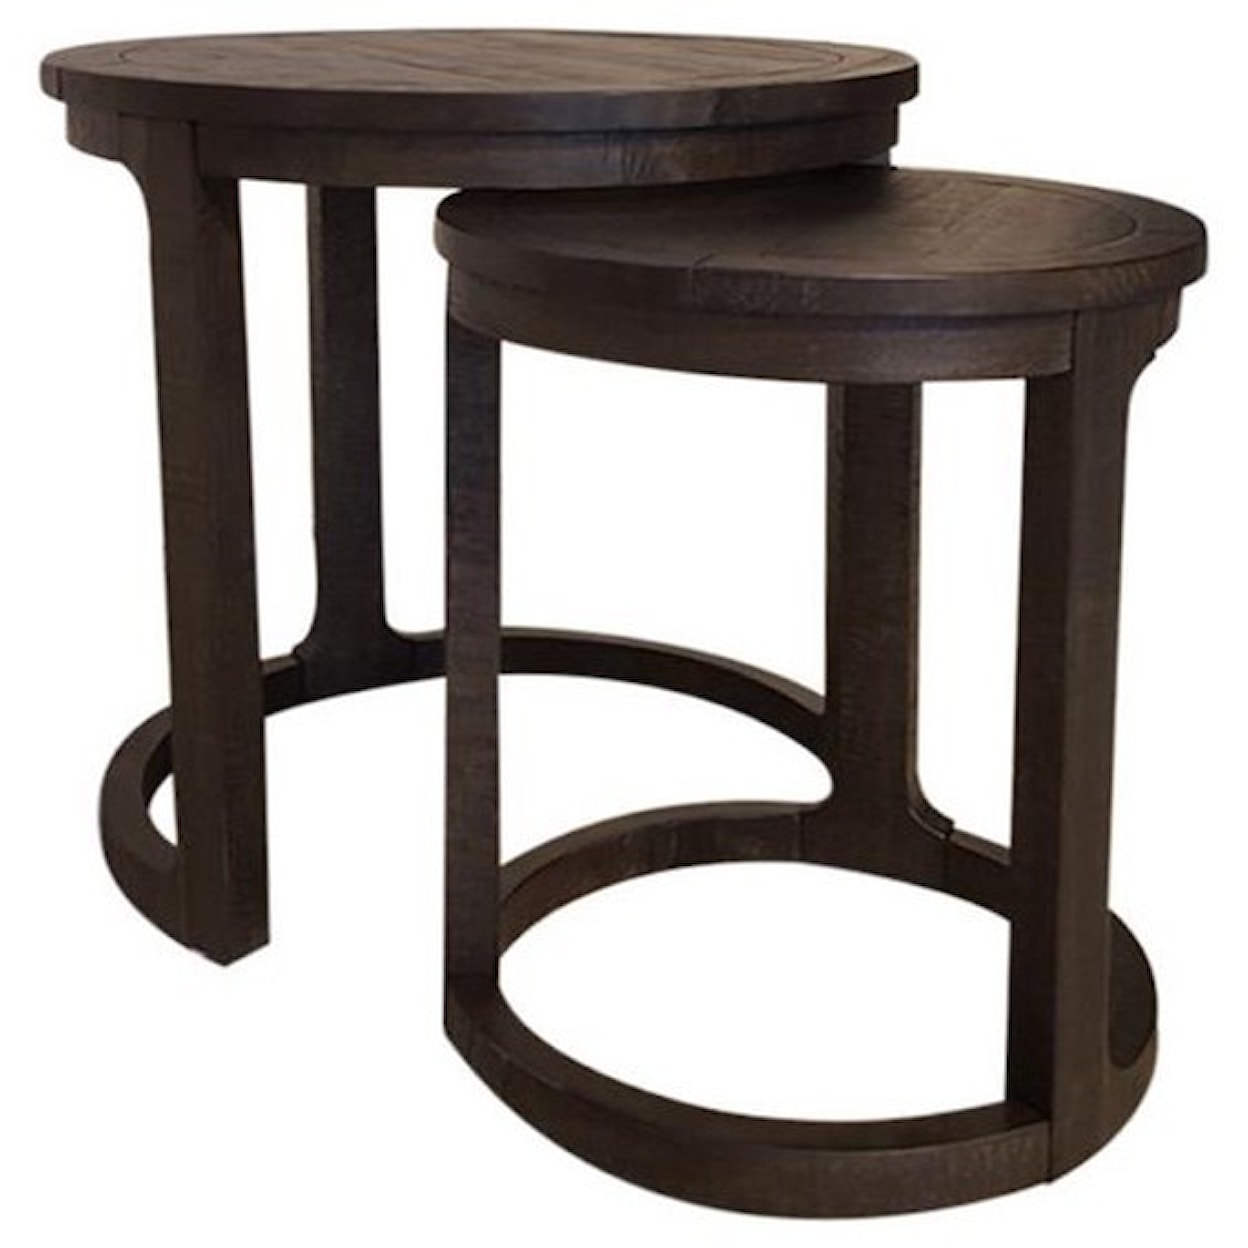 Magnussen Home Boswell Occasional Tables Round Nesting End Table Set